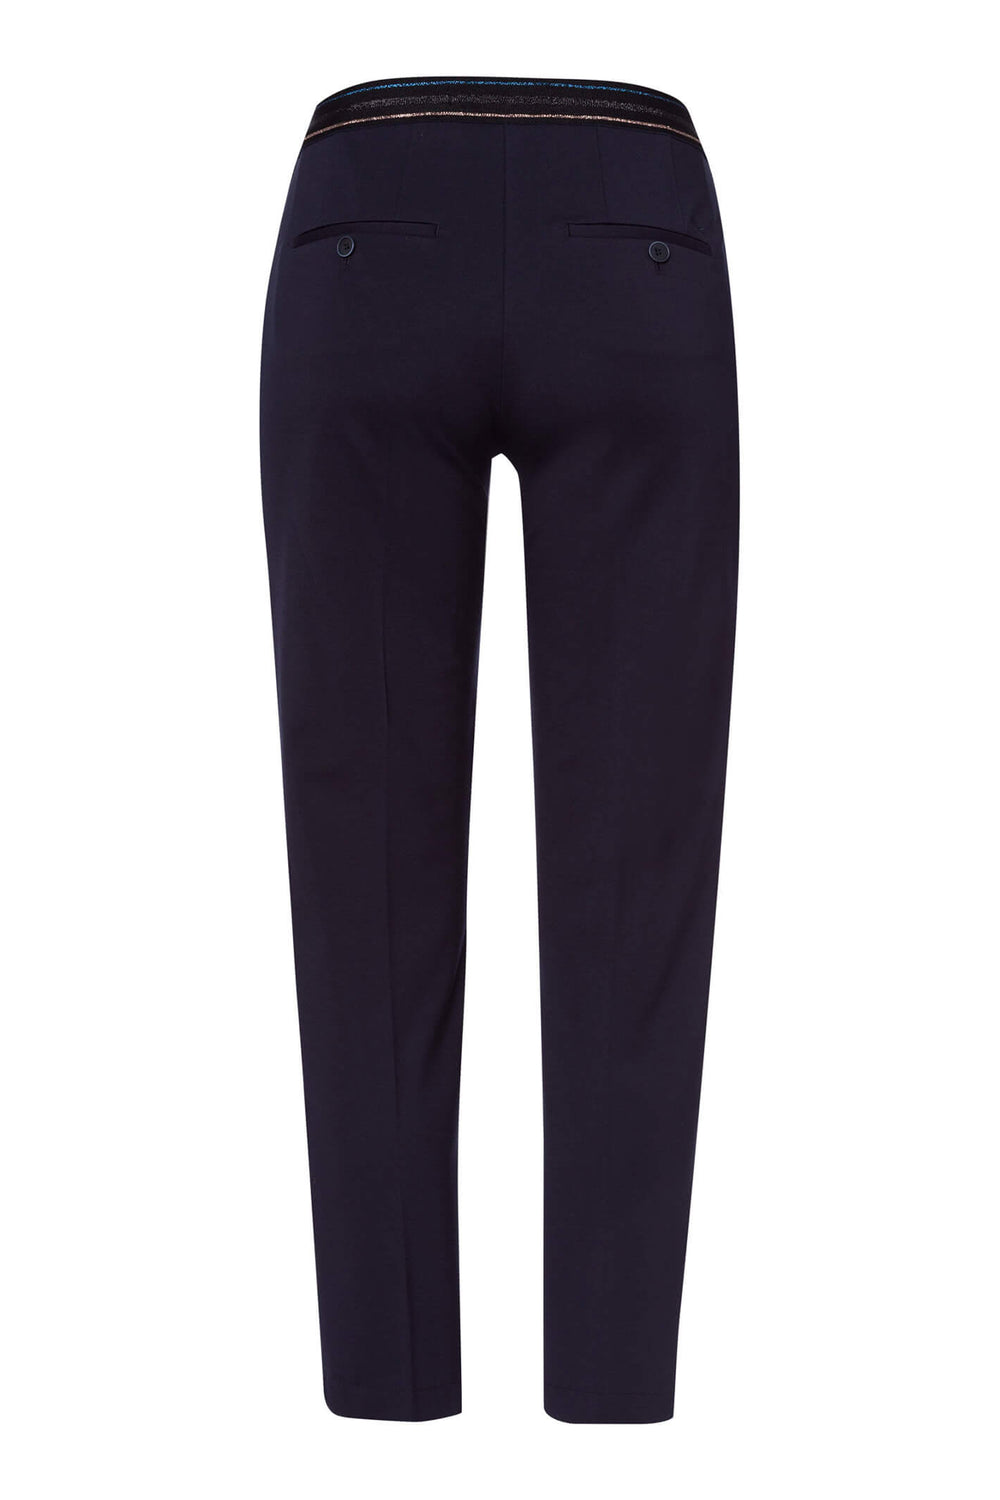 Brax Maron 75-5657/22 Navy 7/8 Flat Front Trousers - Shirley Allum Boutique